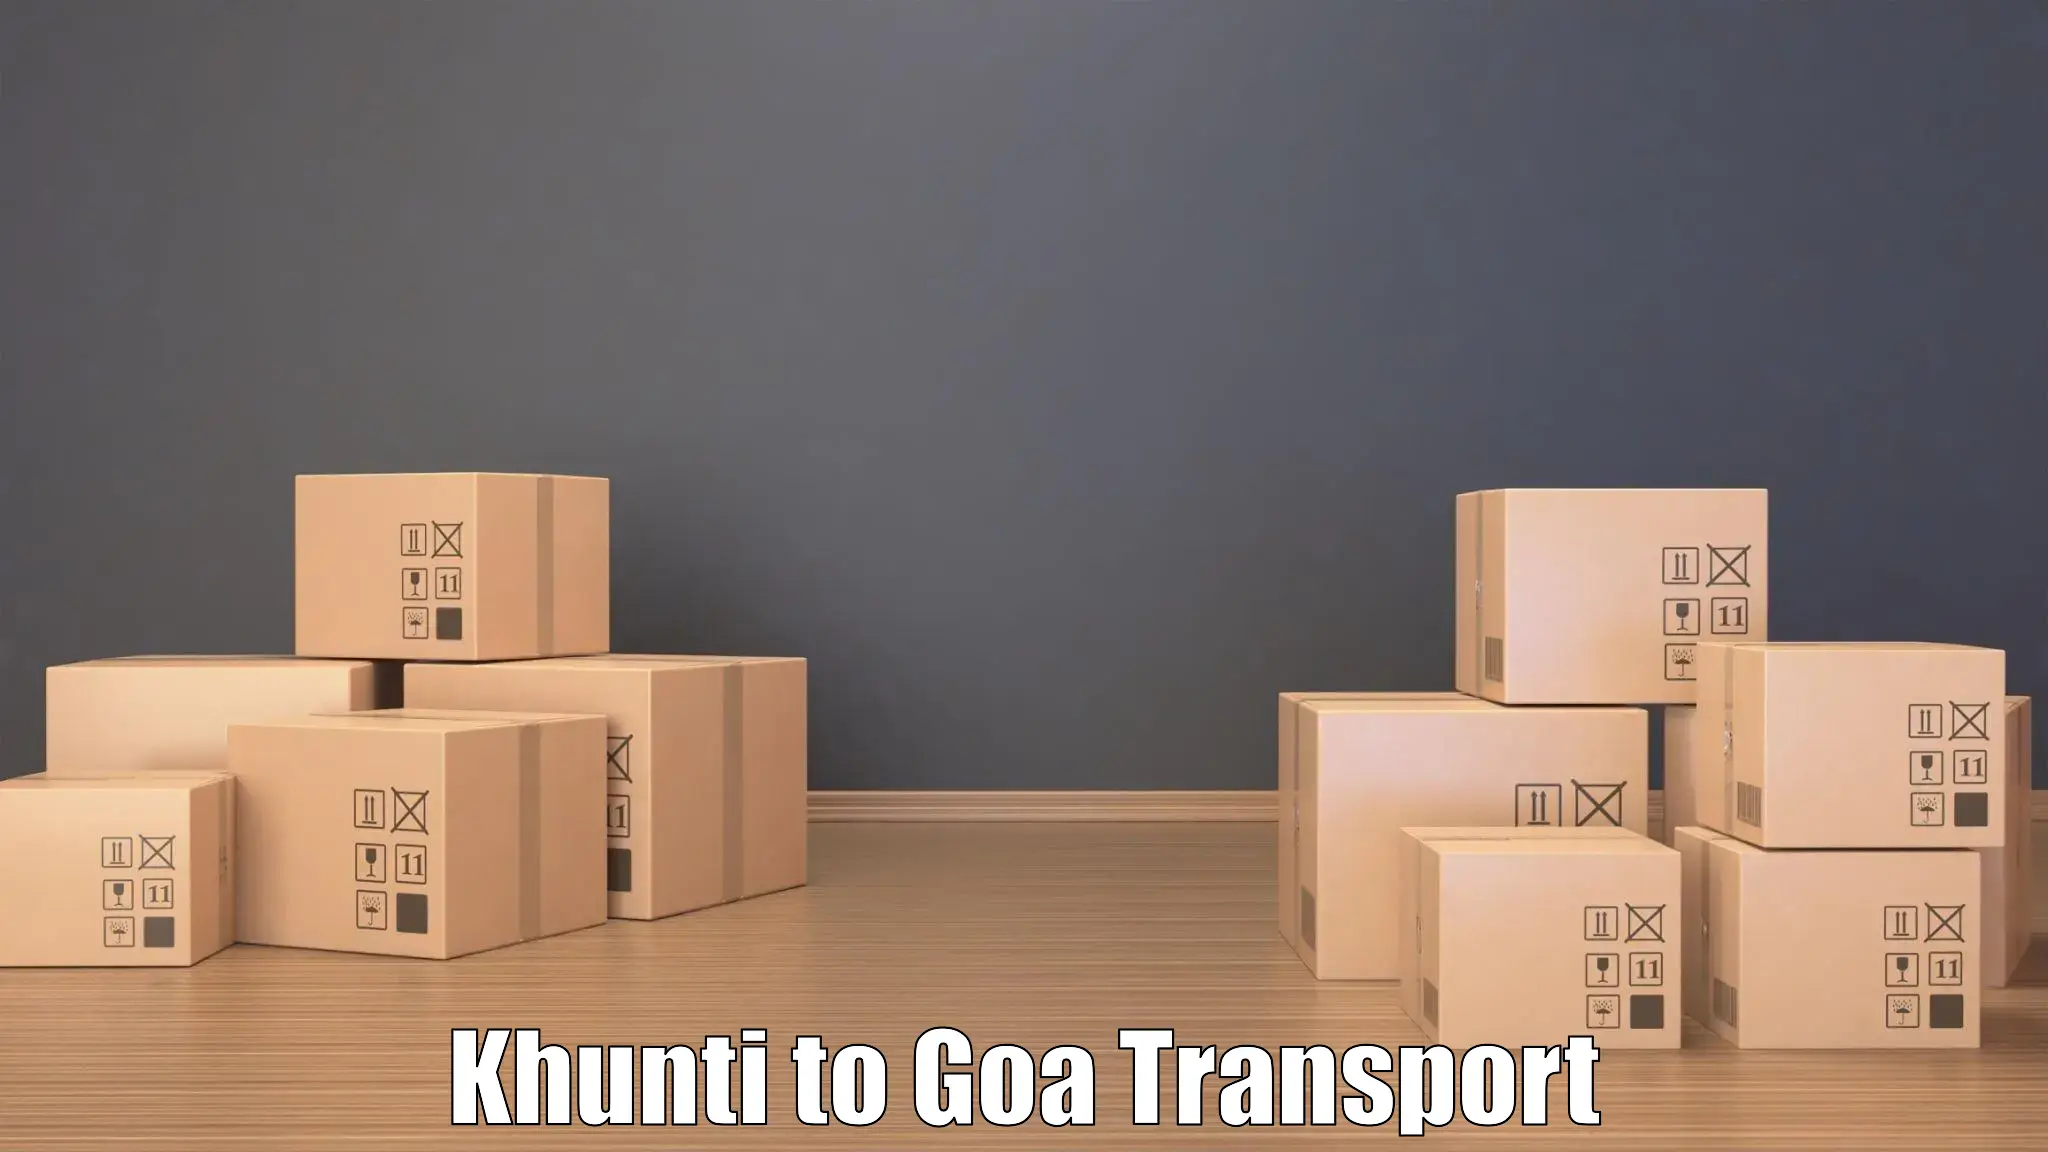 Nearby transport service Khunti to Goa